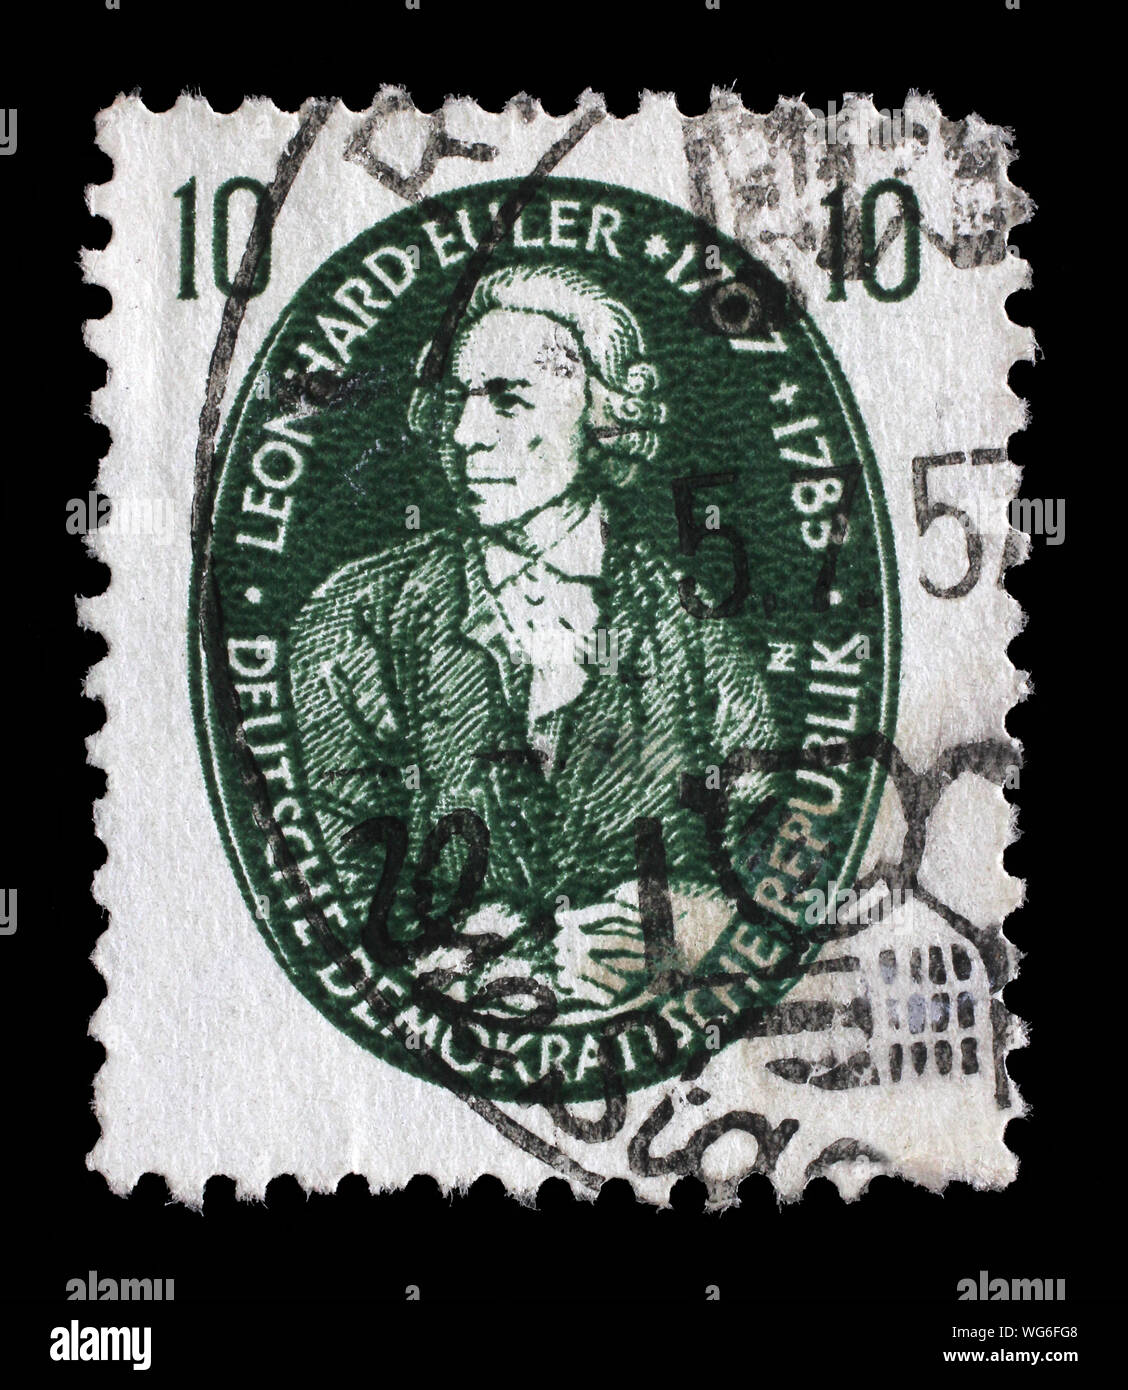 Stamp issued in Germany - Democratic Republic (DDR) shows Leonhard Euler, mathematician, physicist, astronomer, logician and engineer, circa 1957. Stock Photo